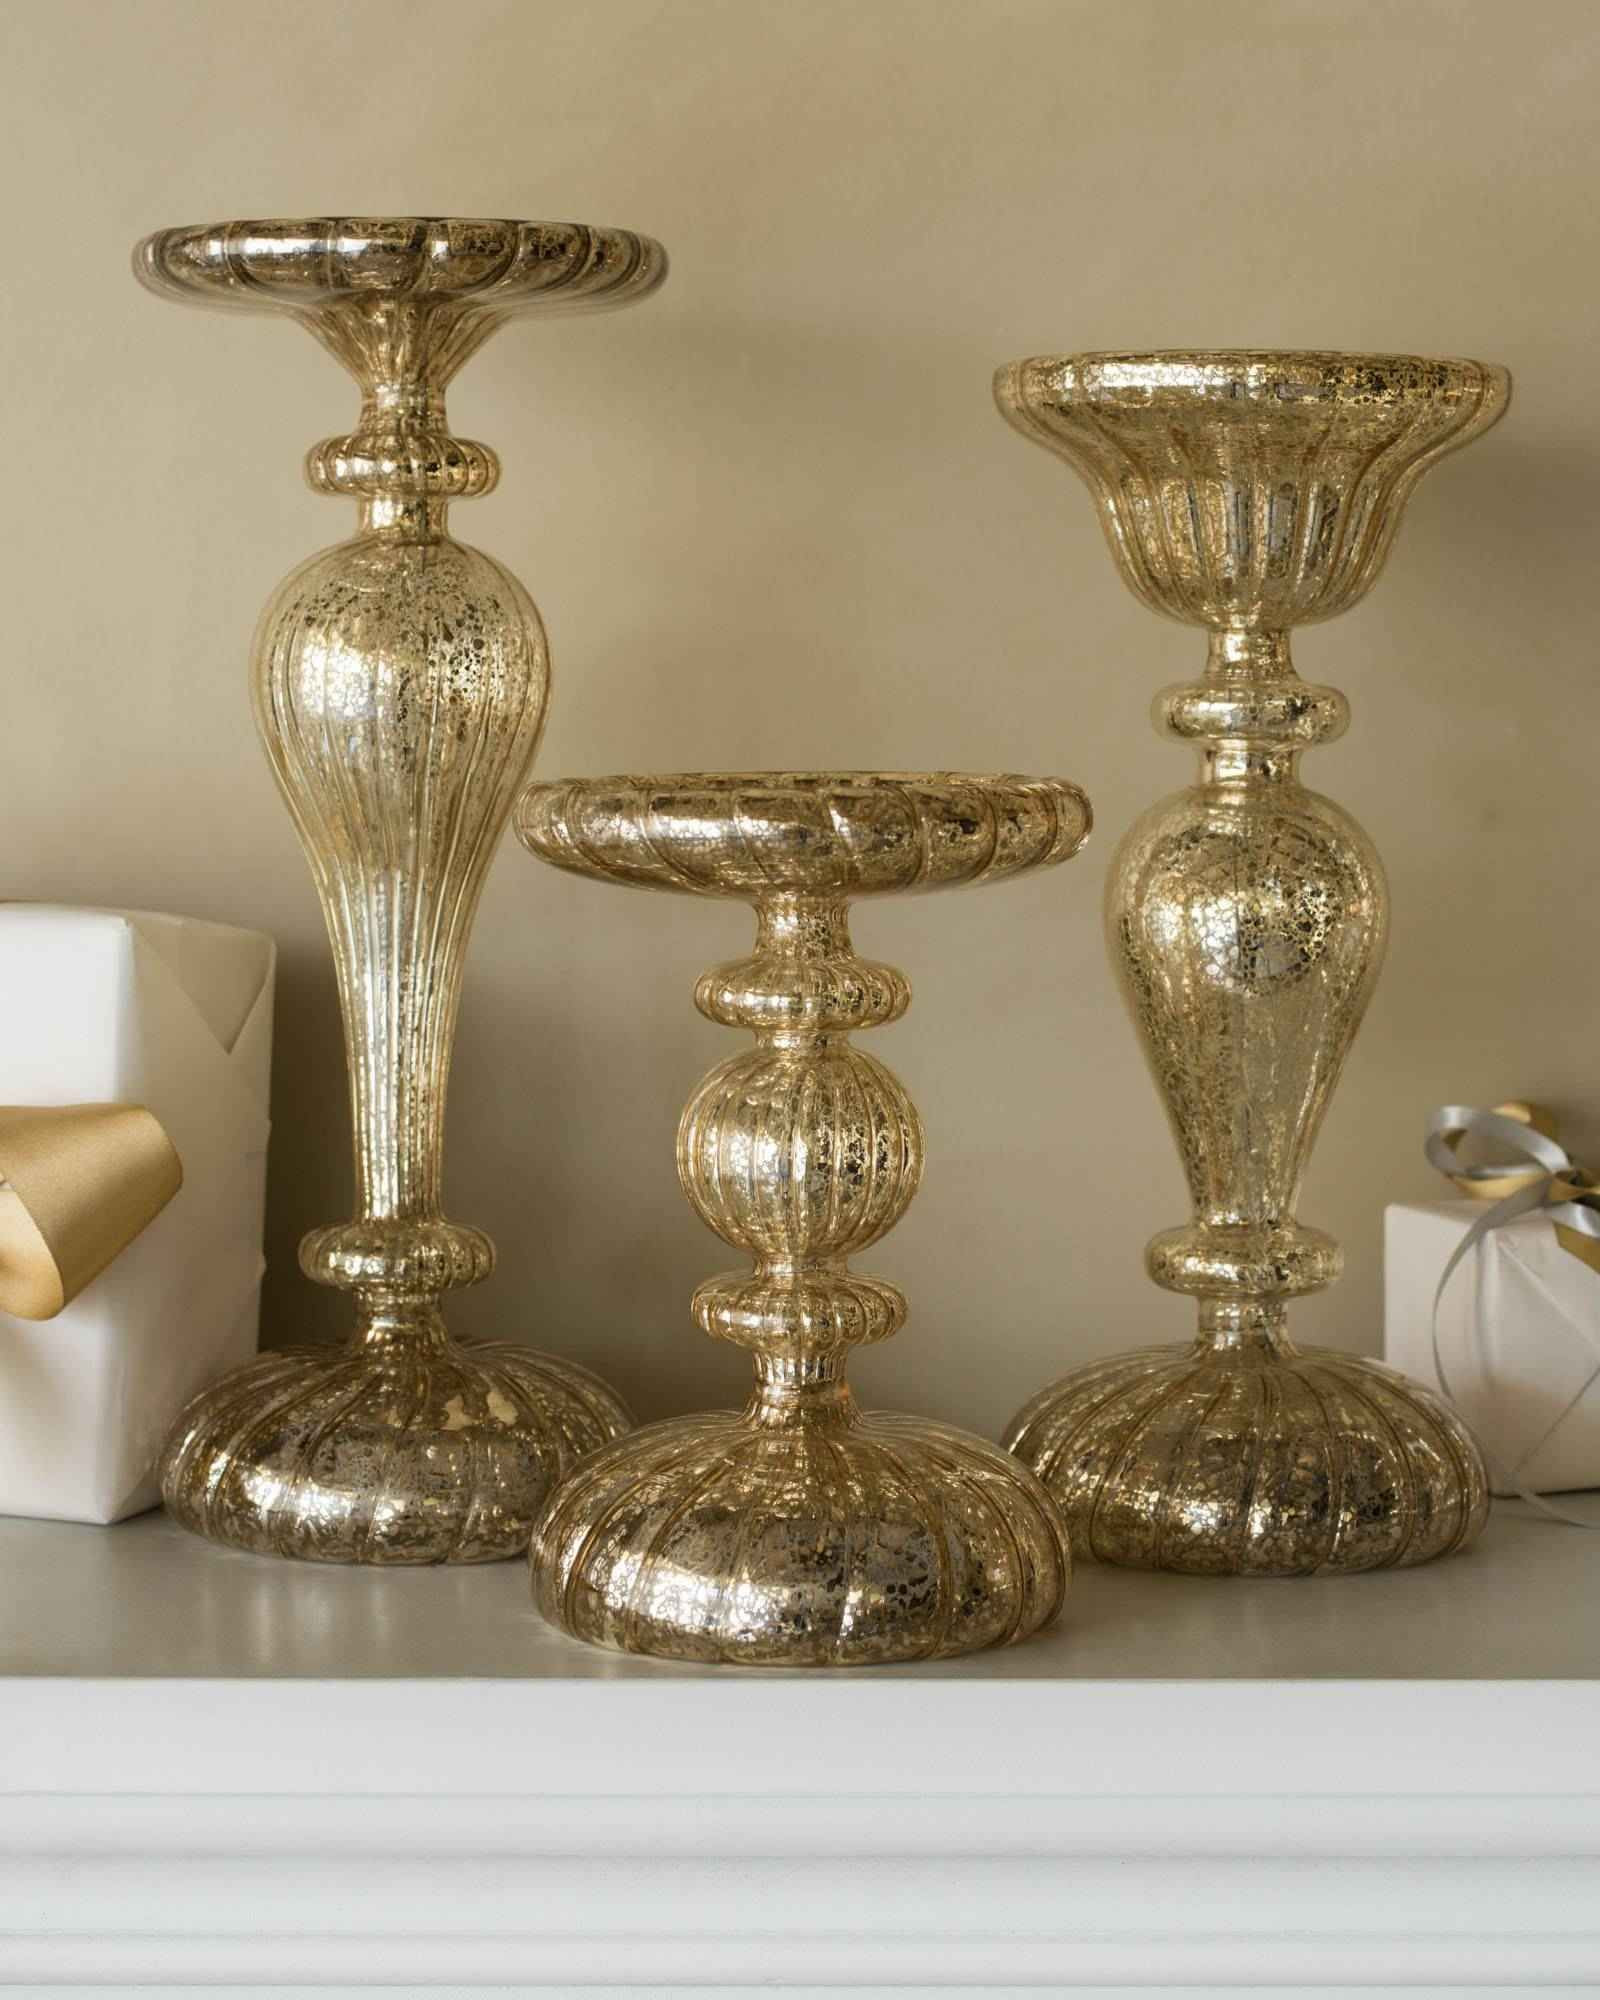 Gold Metal Vases wholesale Of 34 Gold Mercury Glass Vases the Weekly World with Regard to Candle Holder wholesale Glass Votive Candle Holders Inspirational